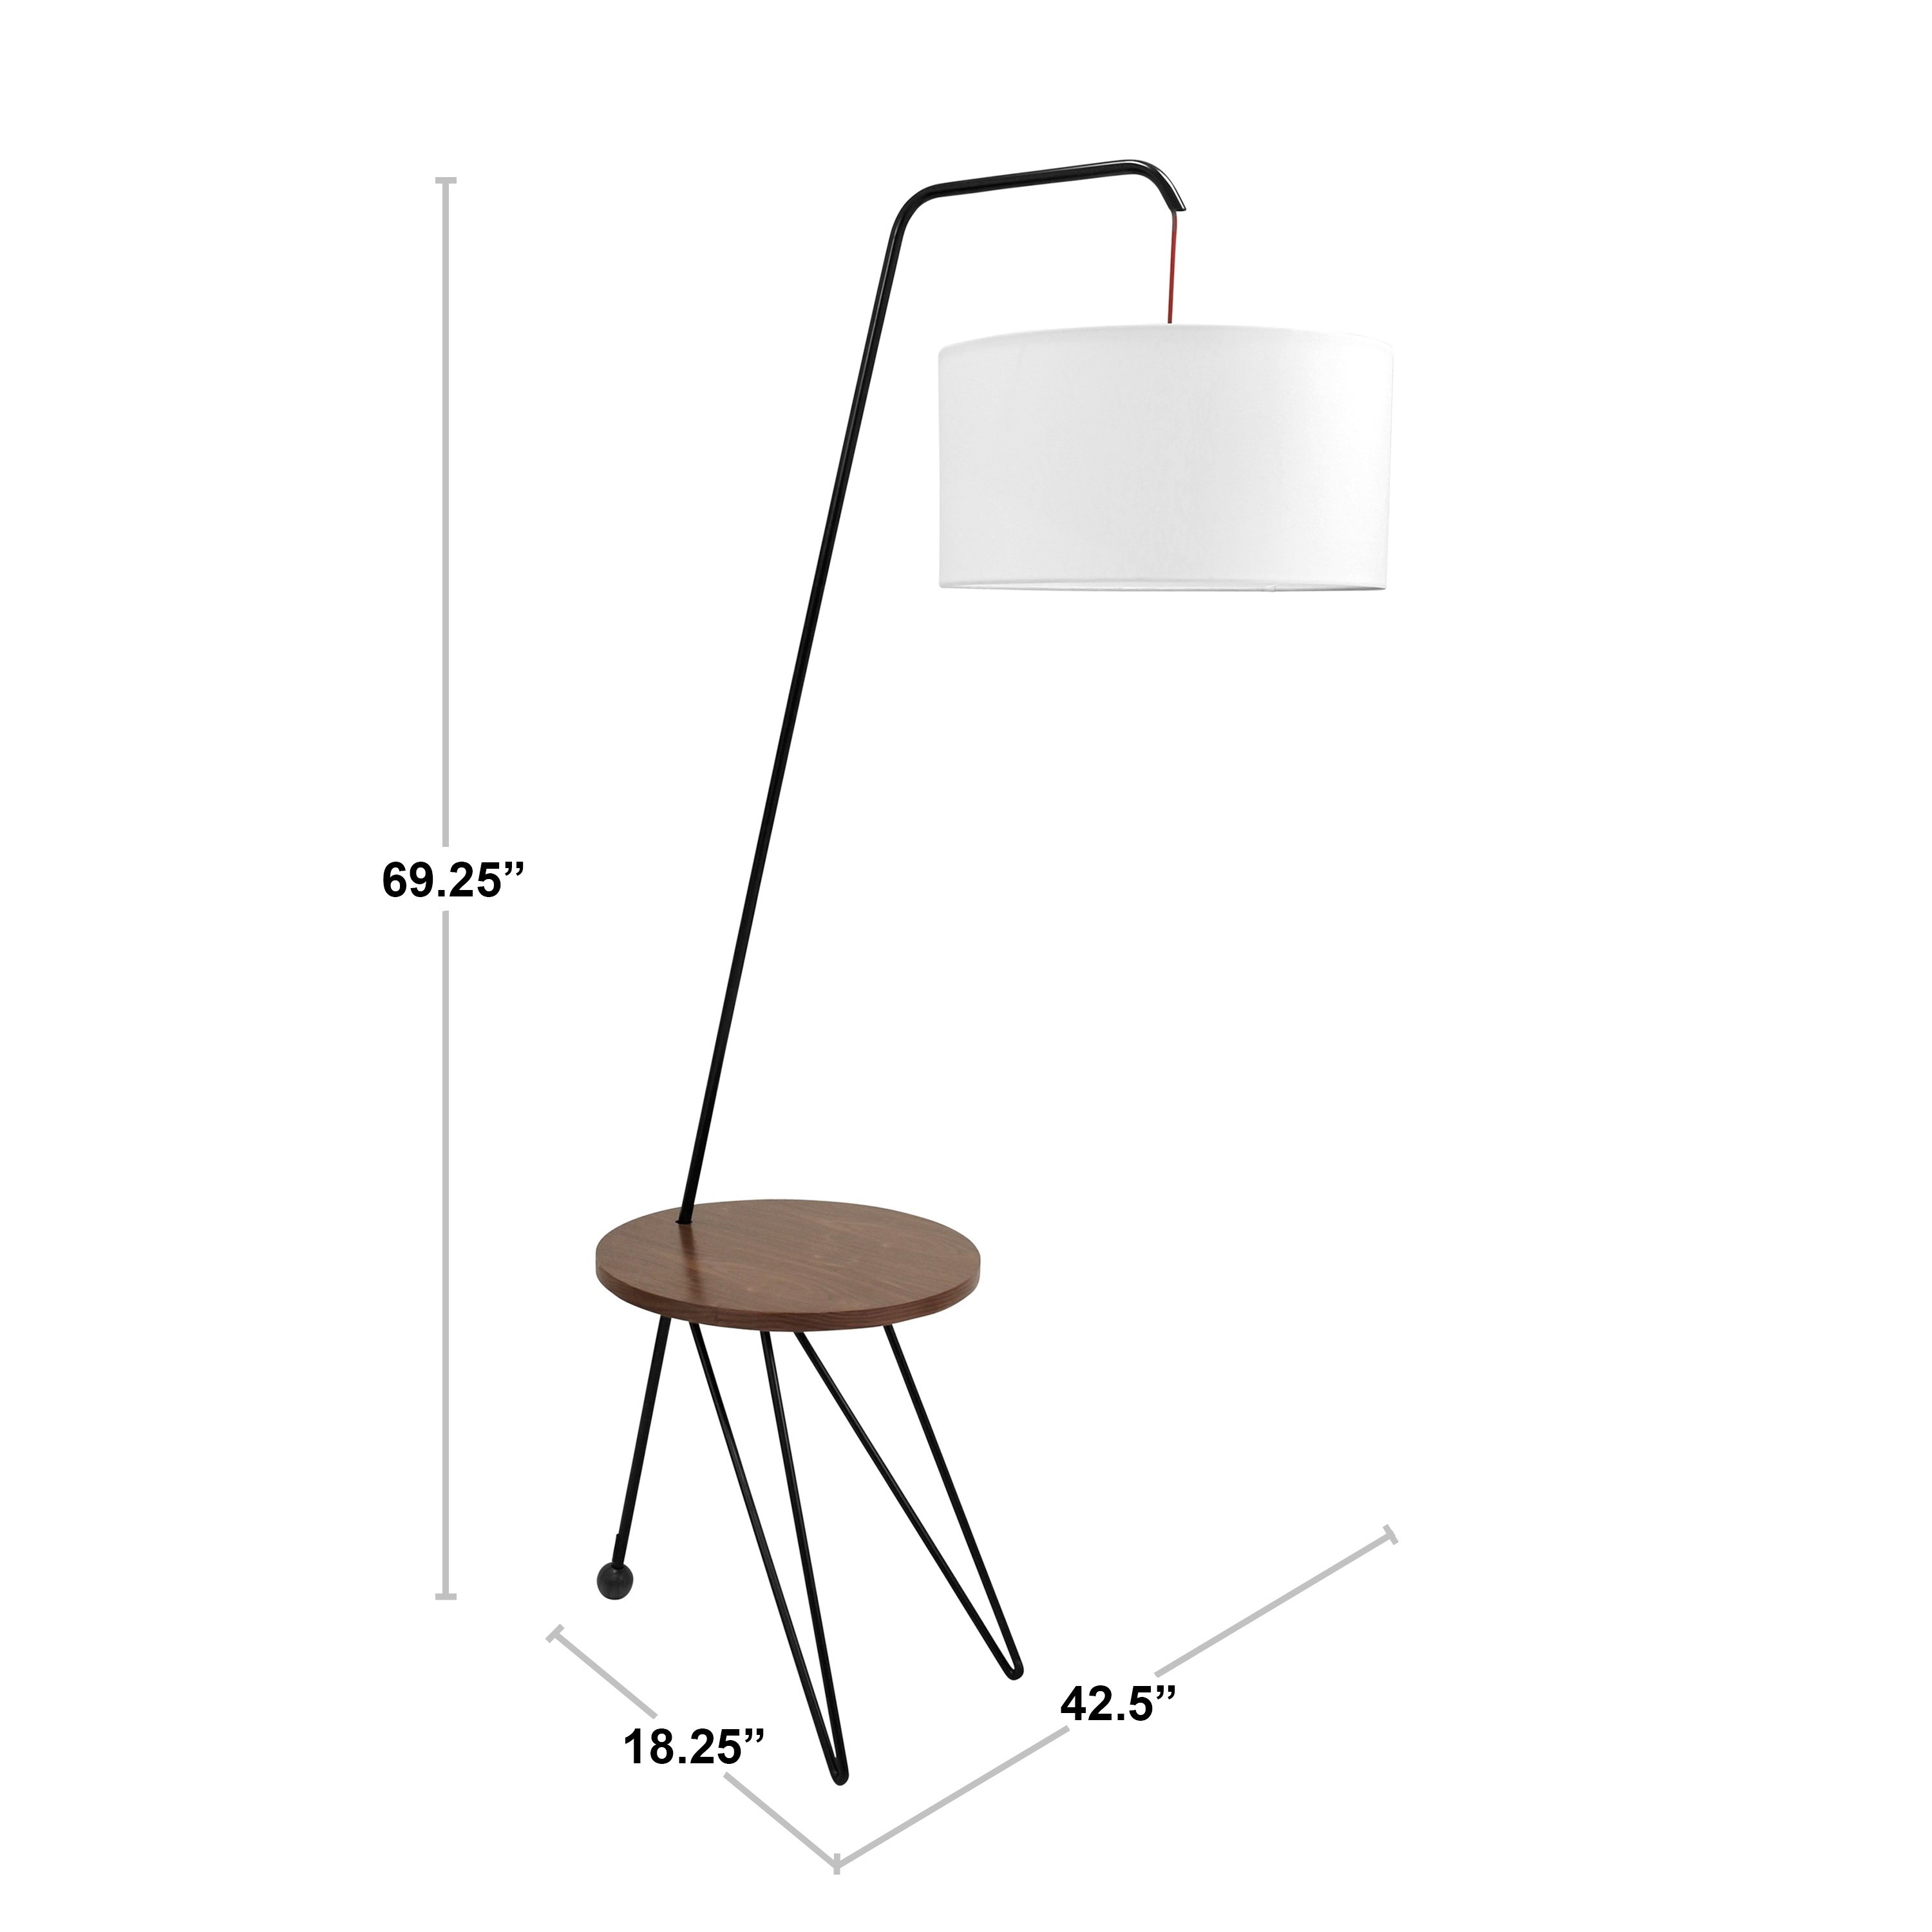 stork mid century modern floor lamp with walnut wood accent table tier target free shipping today wall tables for living room fancy lamps black wine rack ashley furniture keter